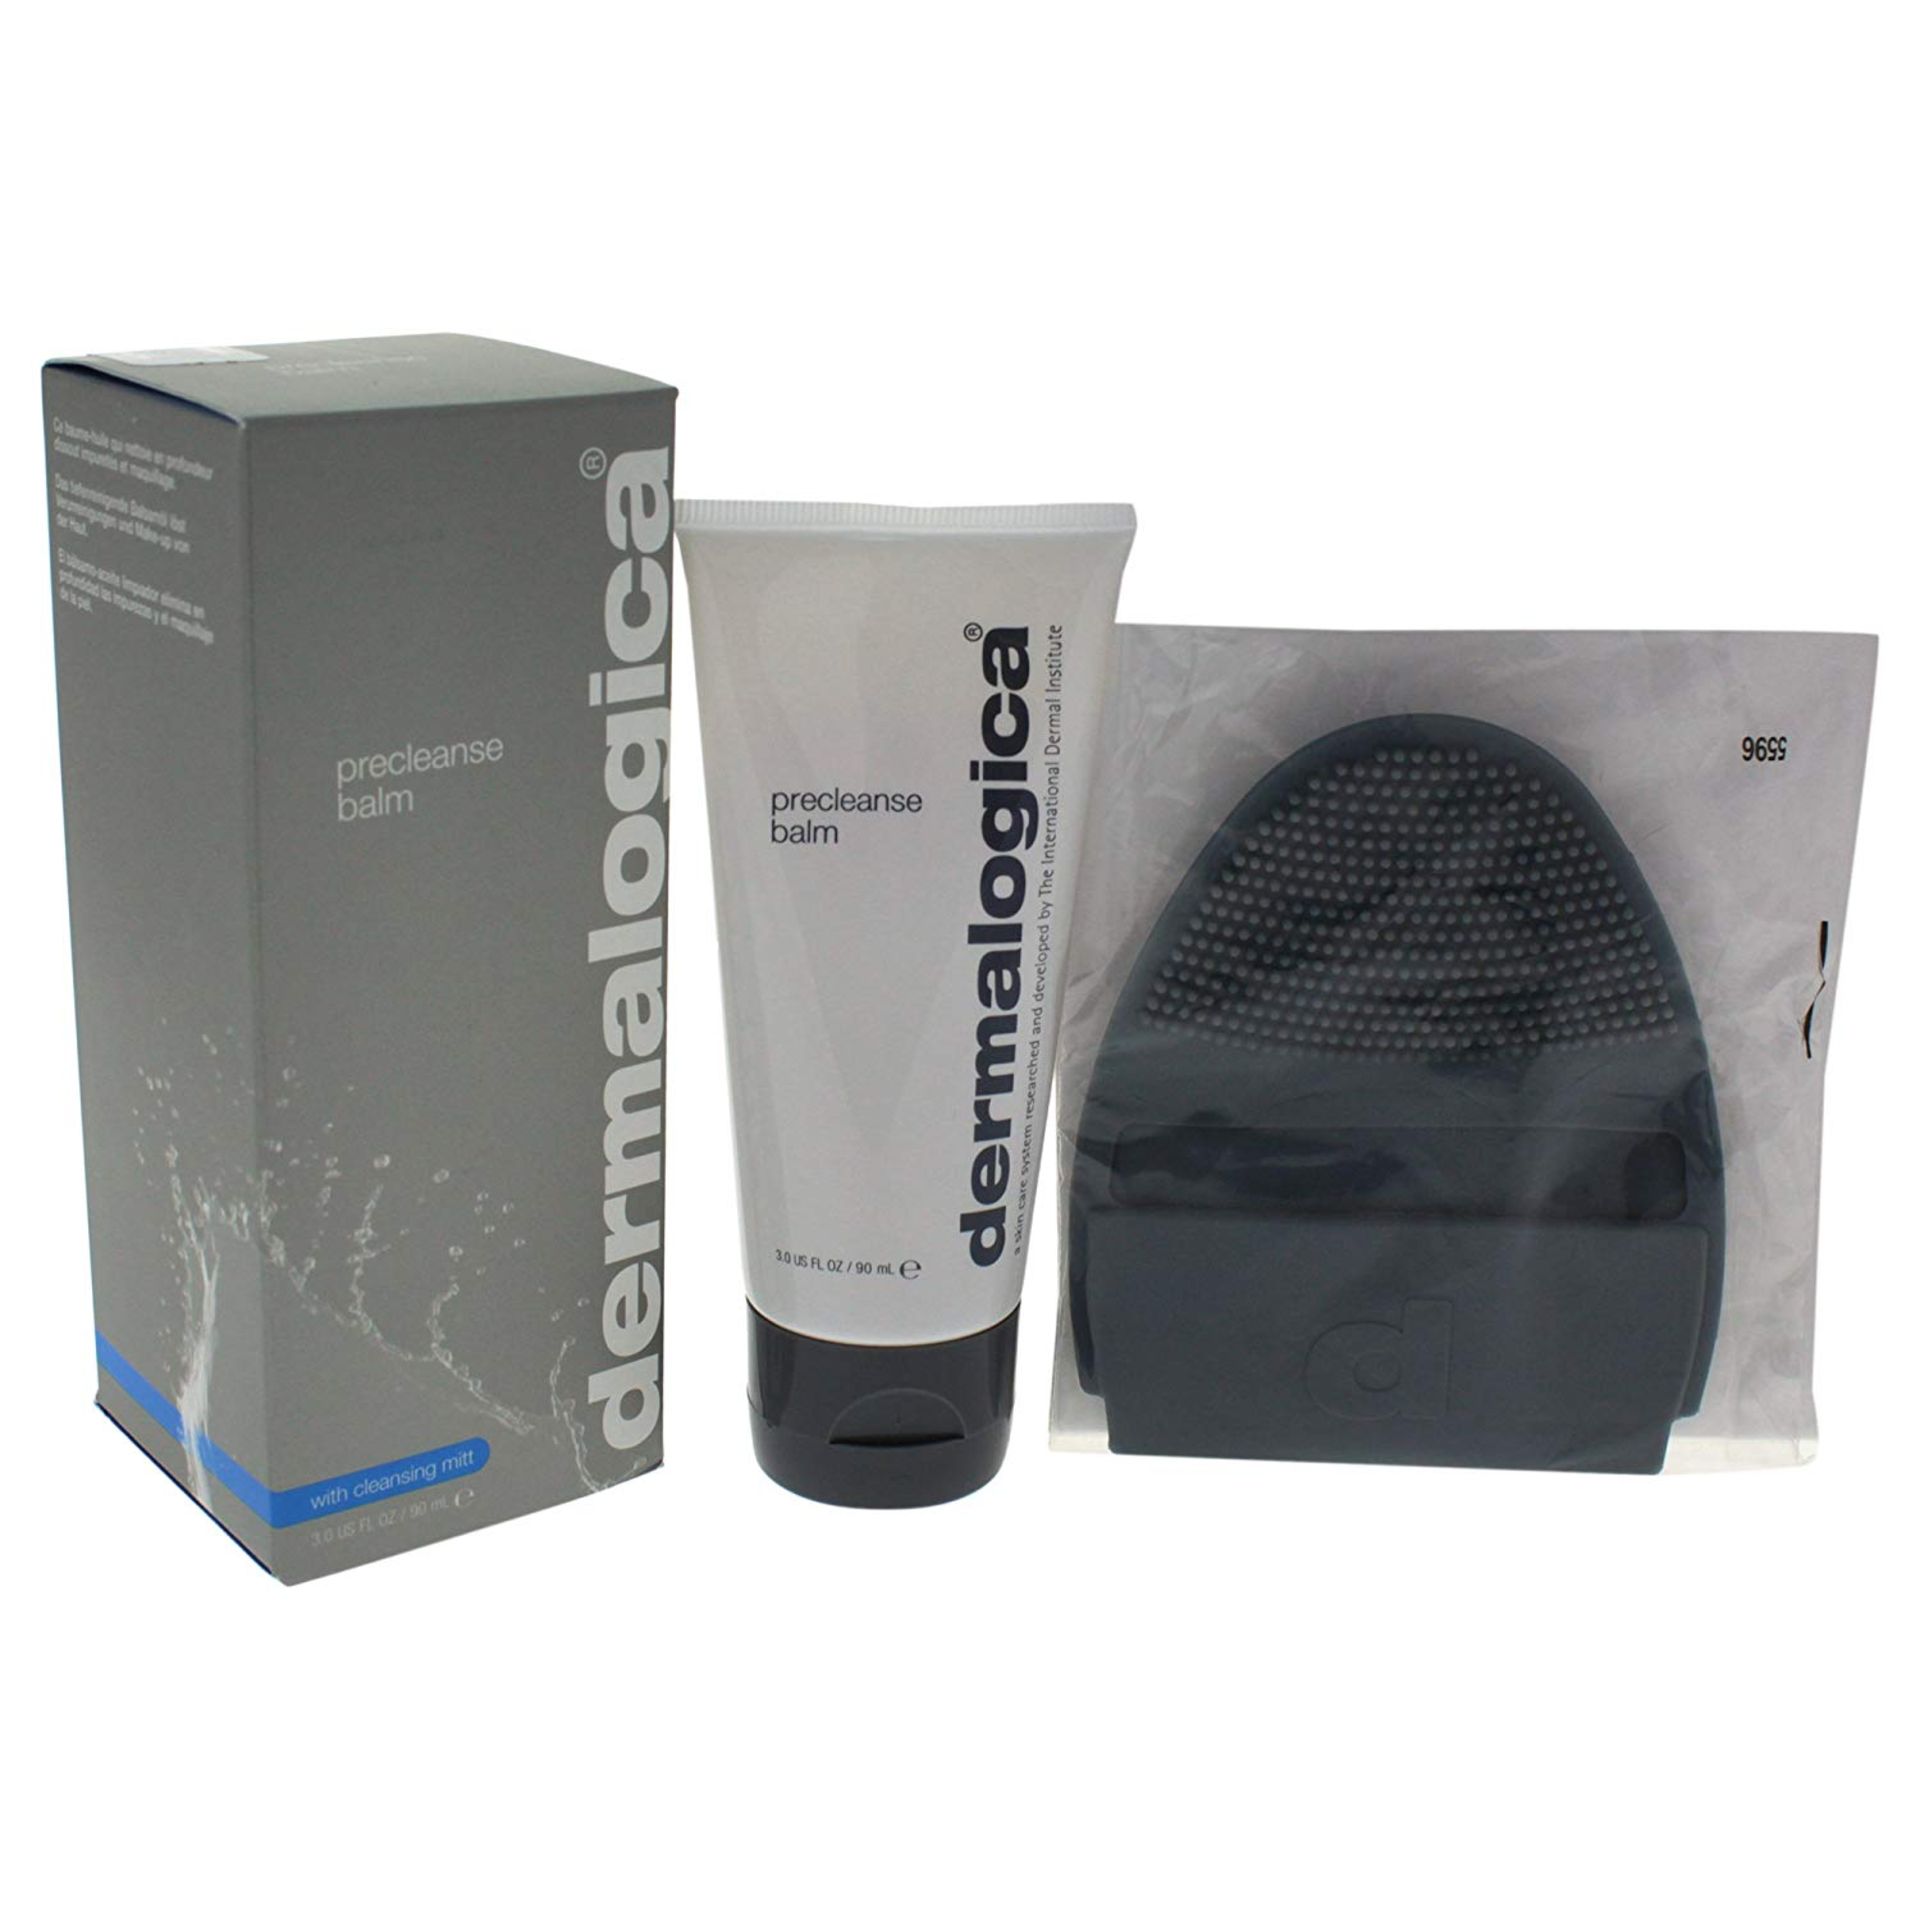 NEW Dermalogica Precleanse Balm With Cleansing Mitt ,90 ml RRP £50